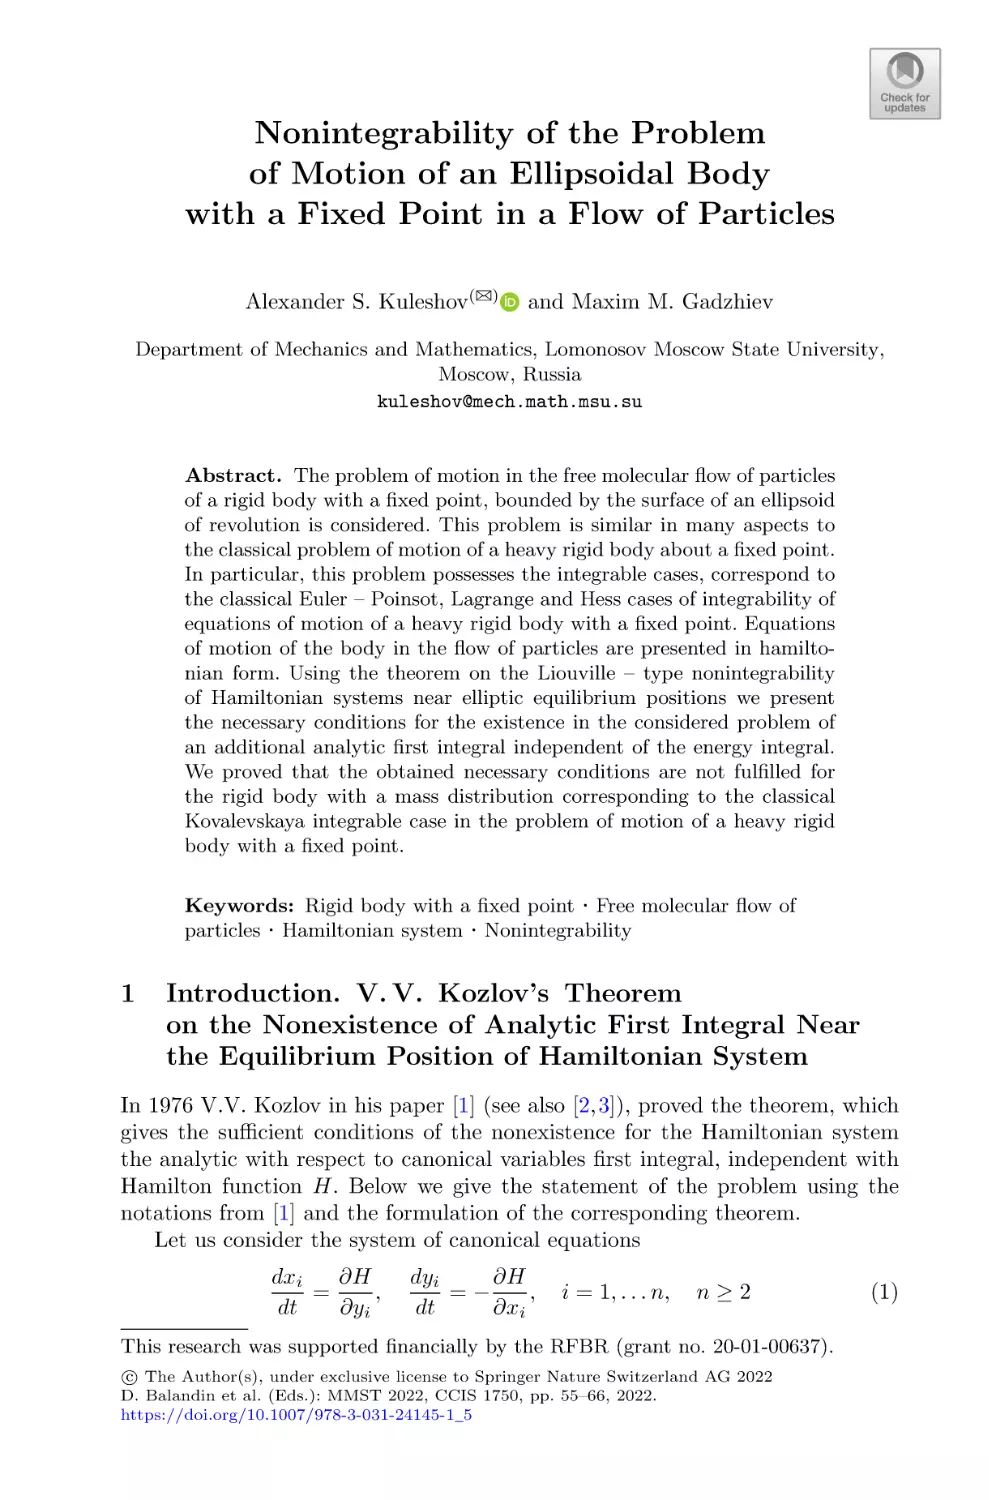 Nonintegrability of the Problem of Motion of an Ellipsoidal Body with a Fixed Point in a Flow of Particles
1 Introduction. V.V. Kozlov's Theorem on the Nonexistence of Analytic First Integral Near the Equilibrium Position of Hamiltonian System